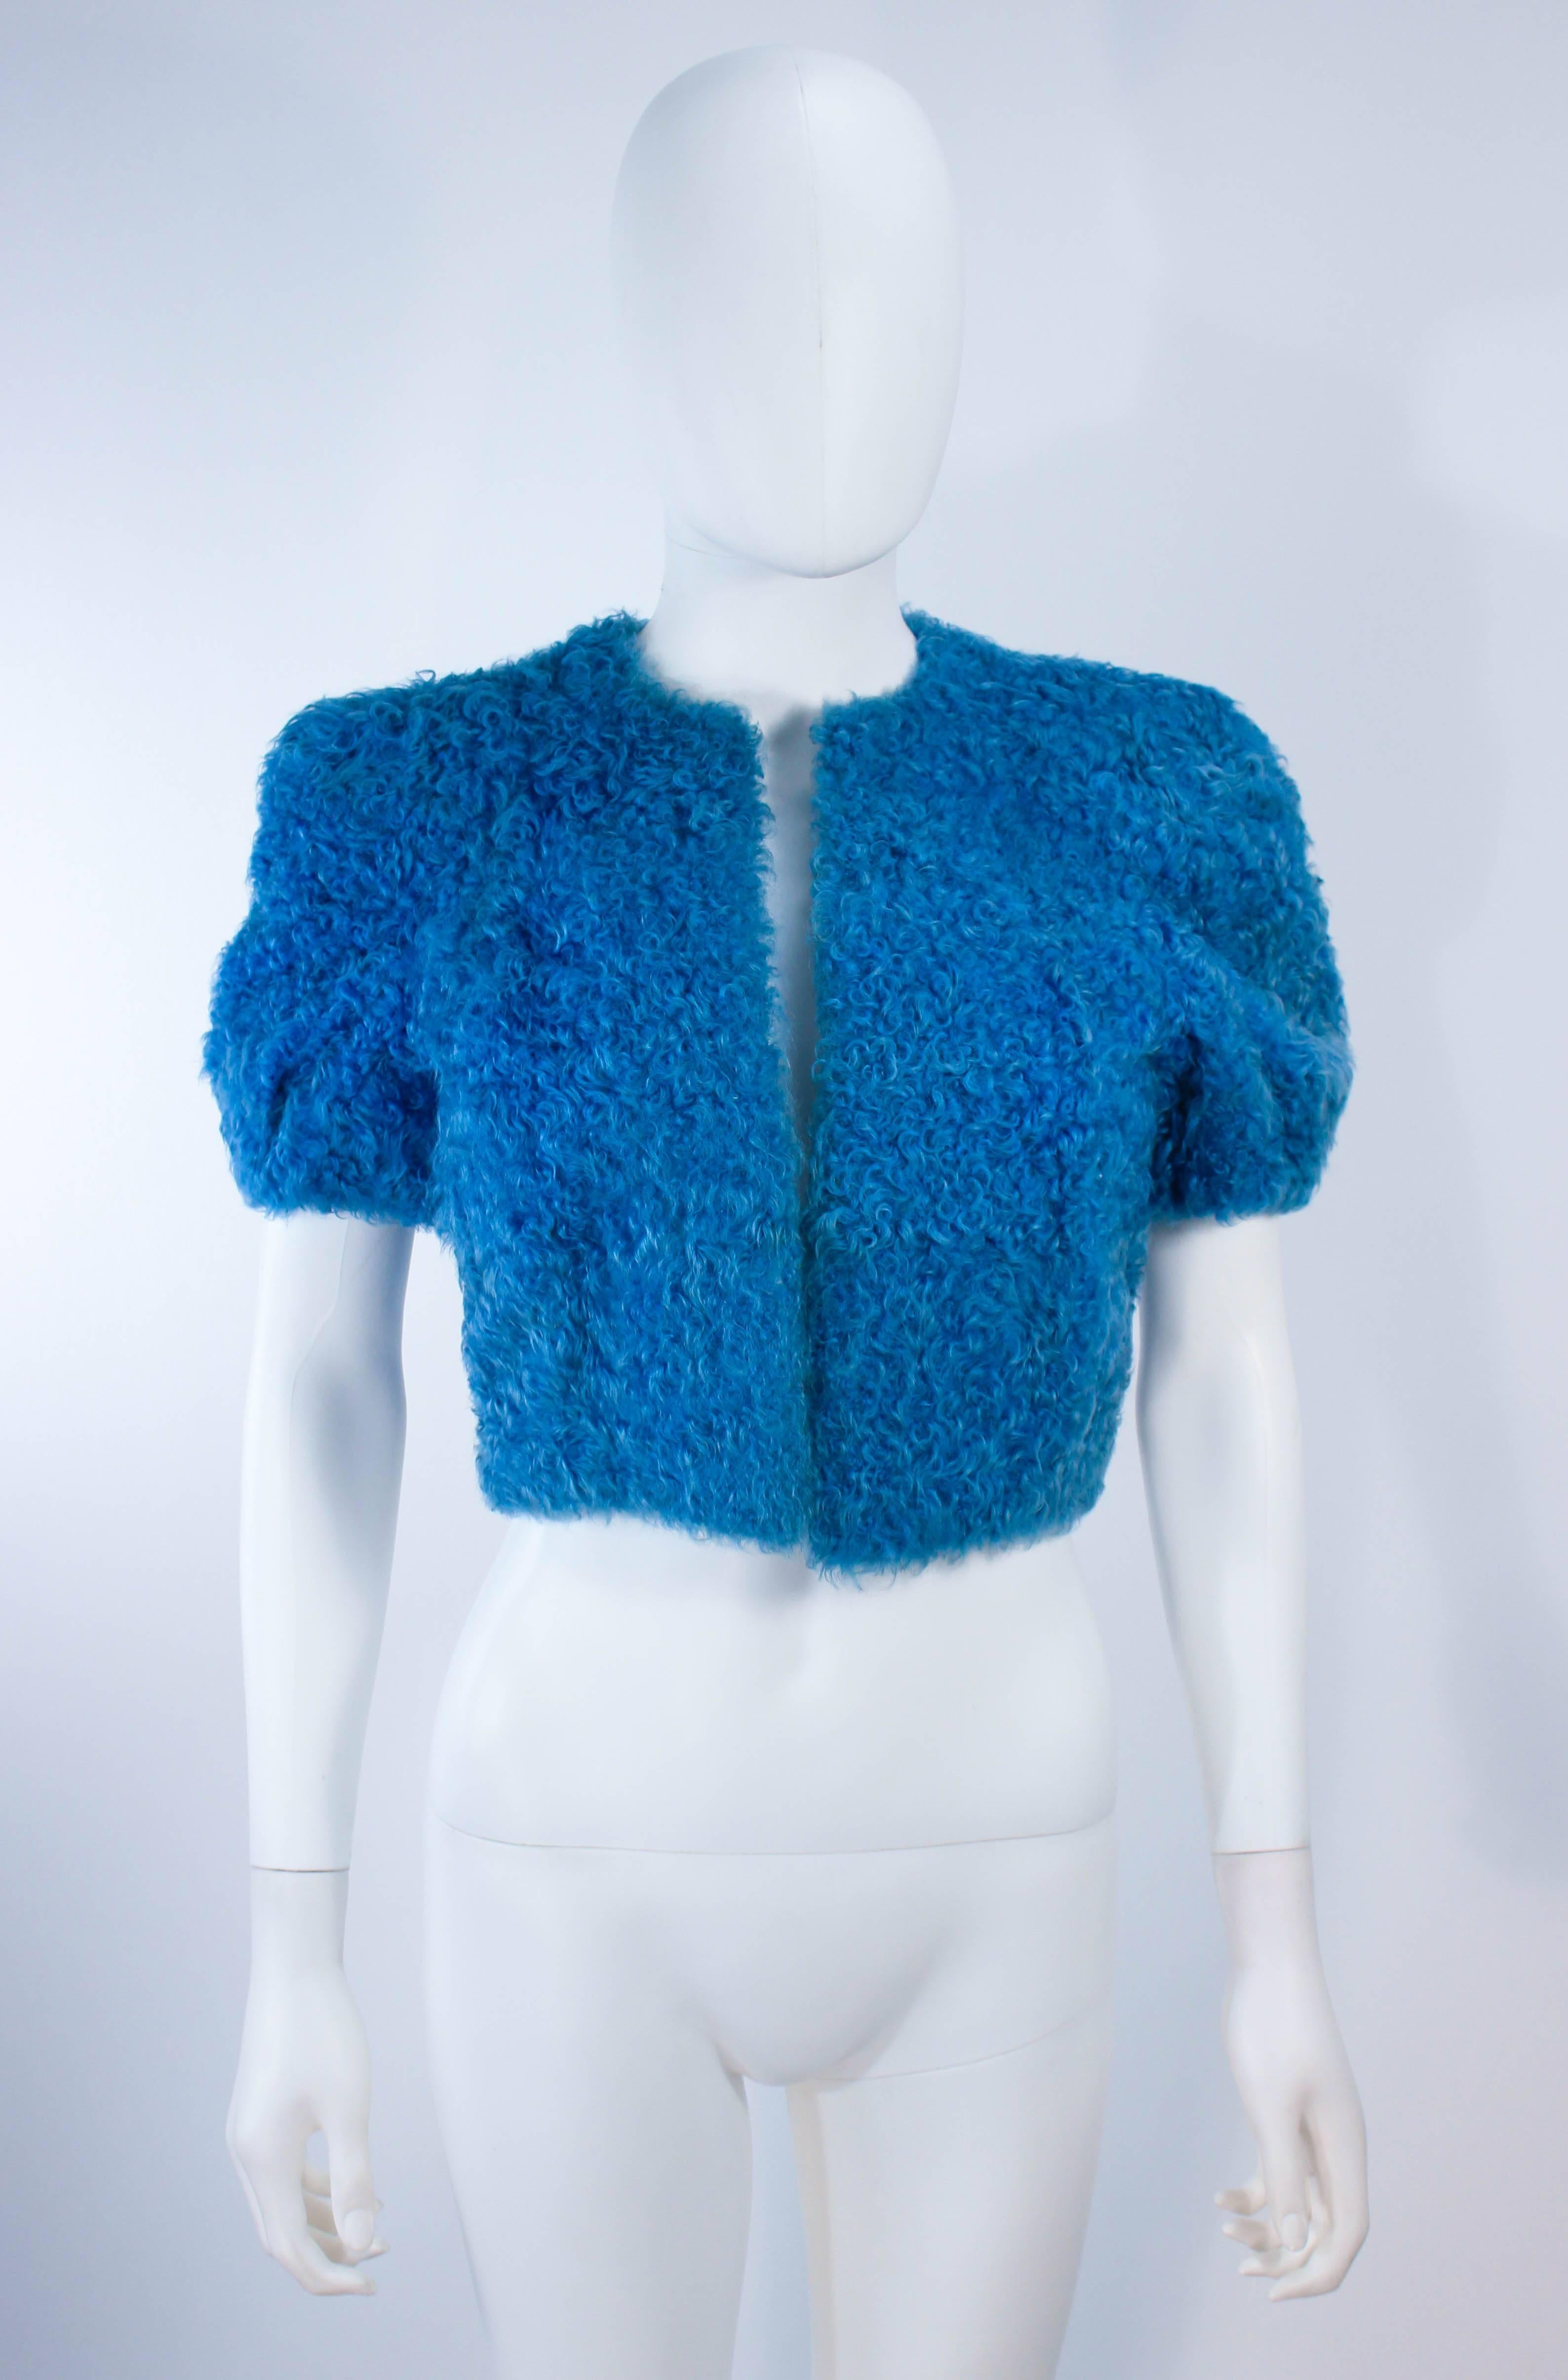 This vintage 1950's cropped jacket is composed of curly blue lamb. Features an open style with slightly puffed sleeves. In excellent vintage condition.

**Please cross-reference measurements for personal accuracy. Size in description box is an